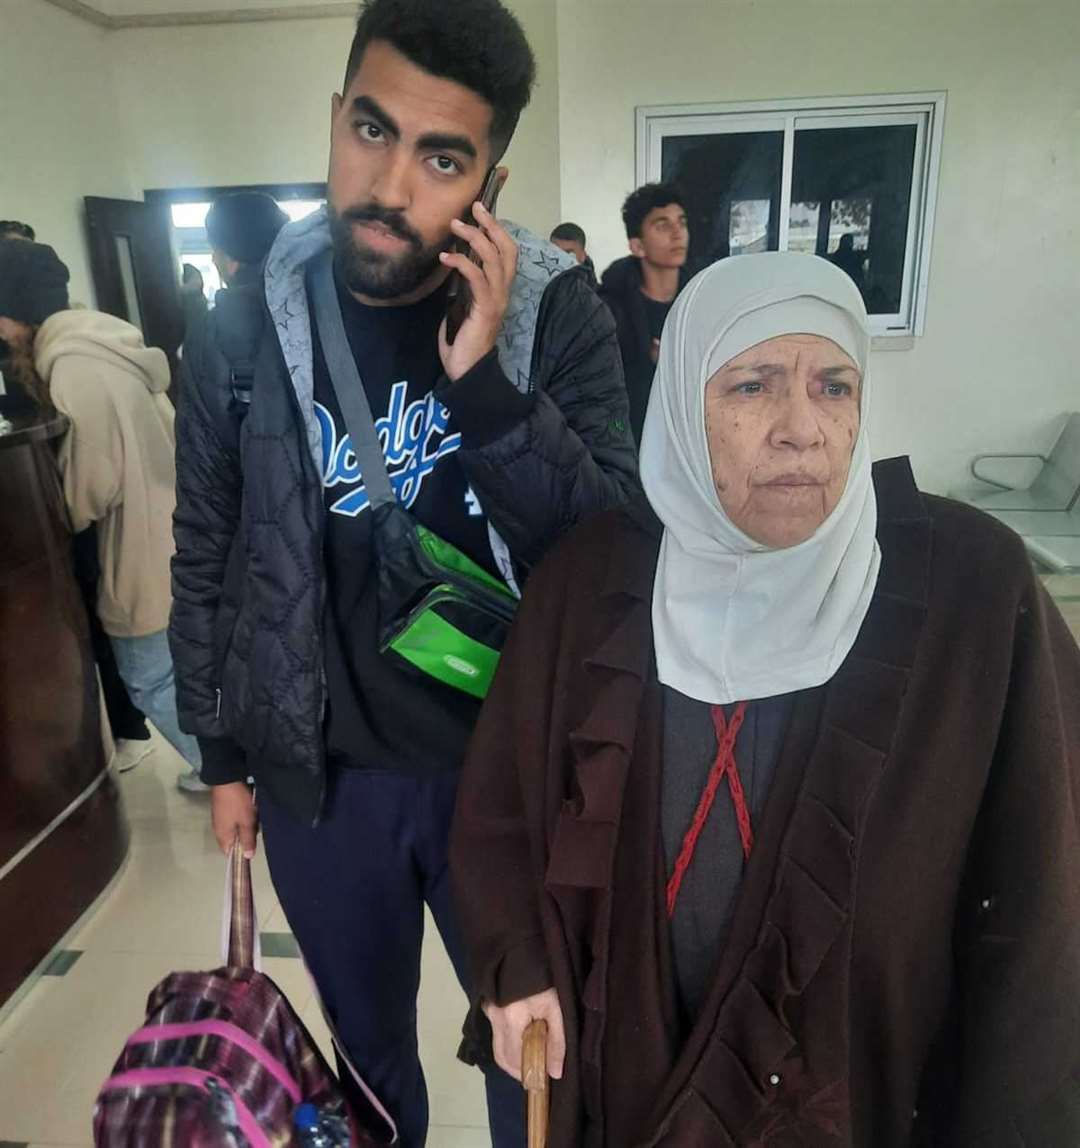 Dr Salim Ghayyda's mother Dalal and nephew, Waleed, at the border crossing.